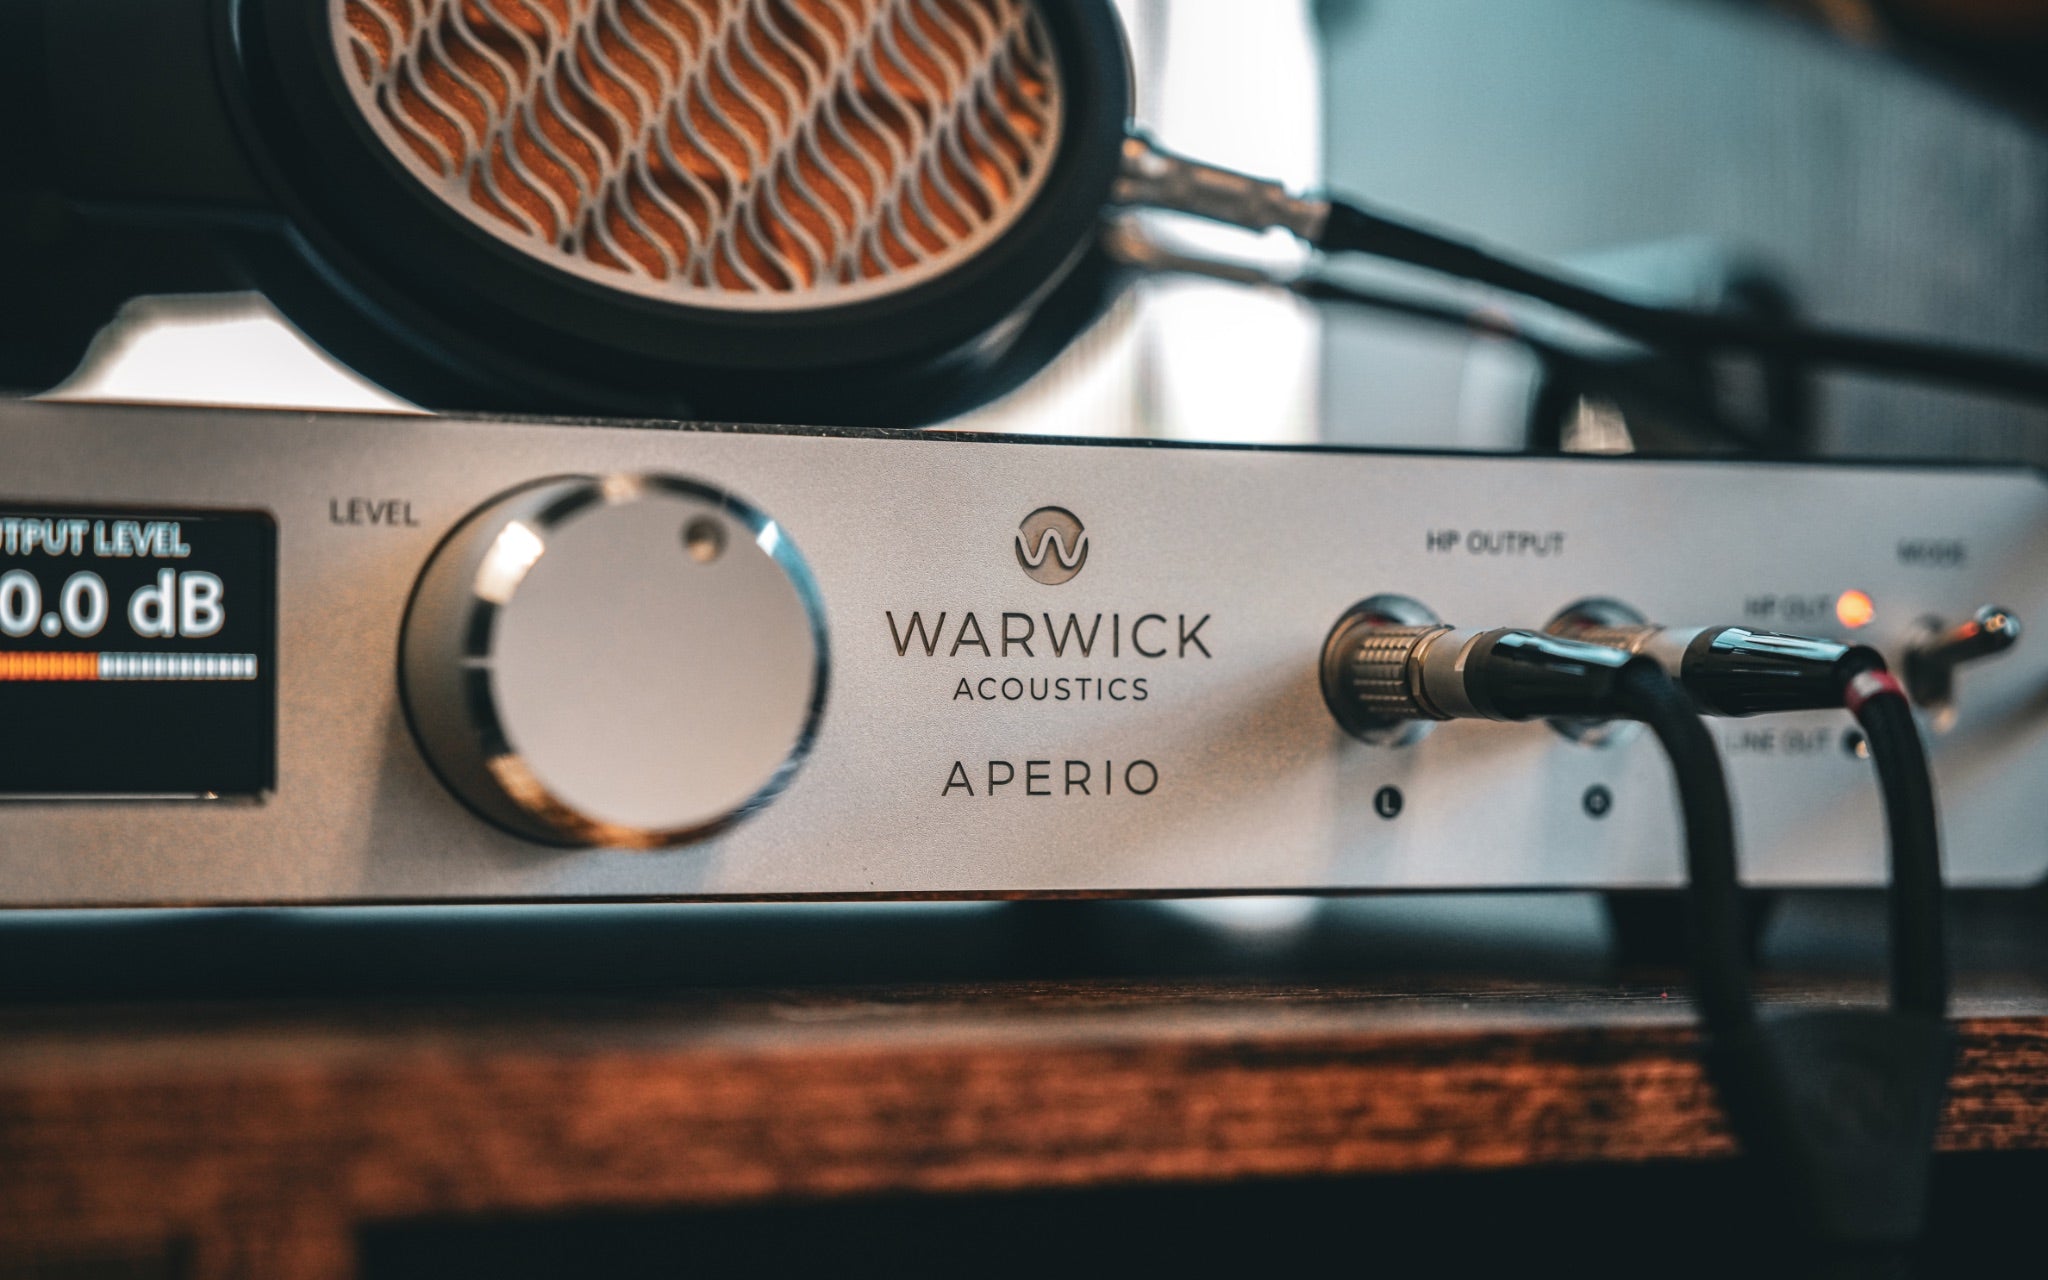 Warwick Aperio silver system highlighting front faceplate, logo and headphone connections